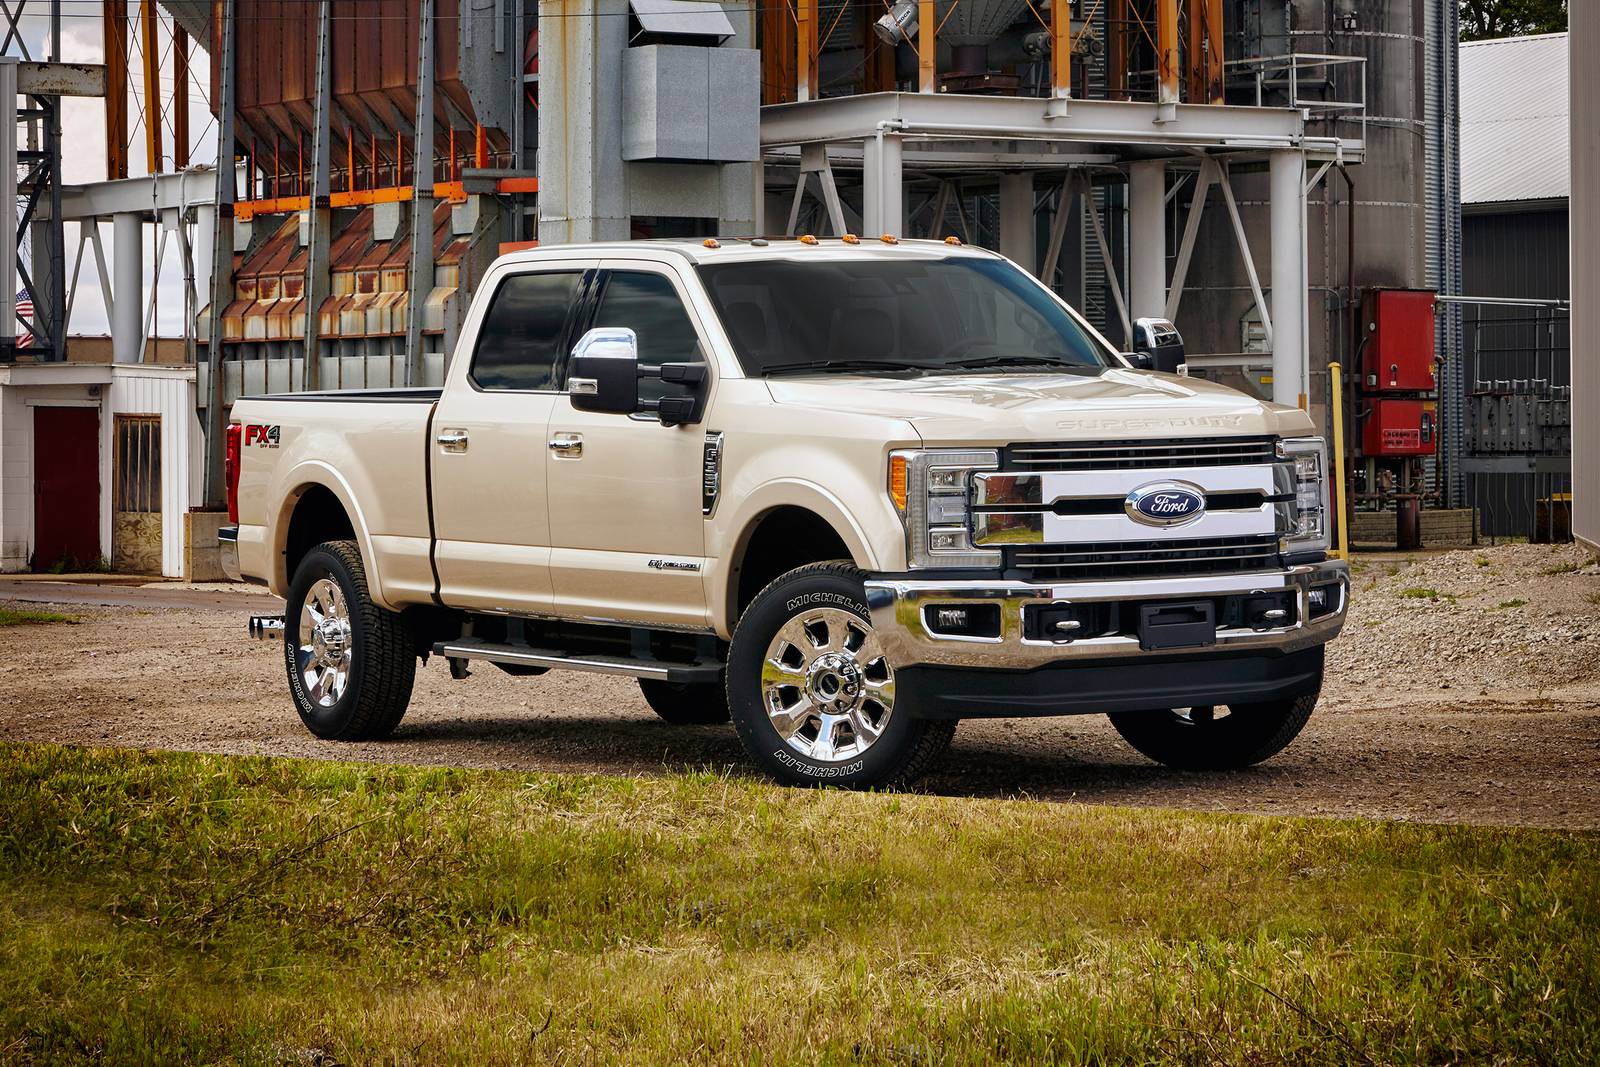 Used 2018 Ford F-350 Super Duty Crew Cab Review | Edmunds